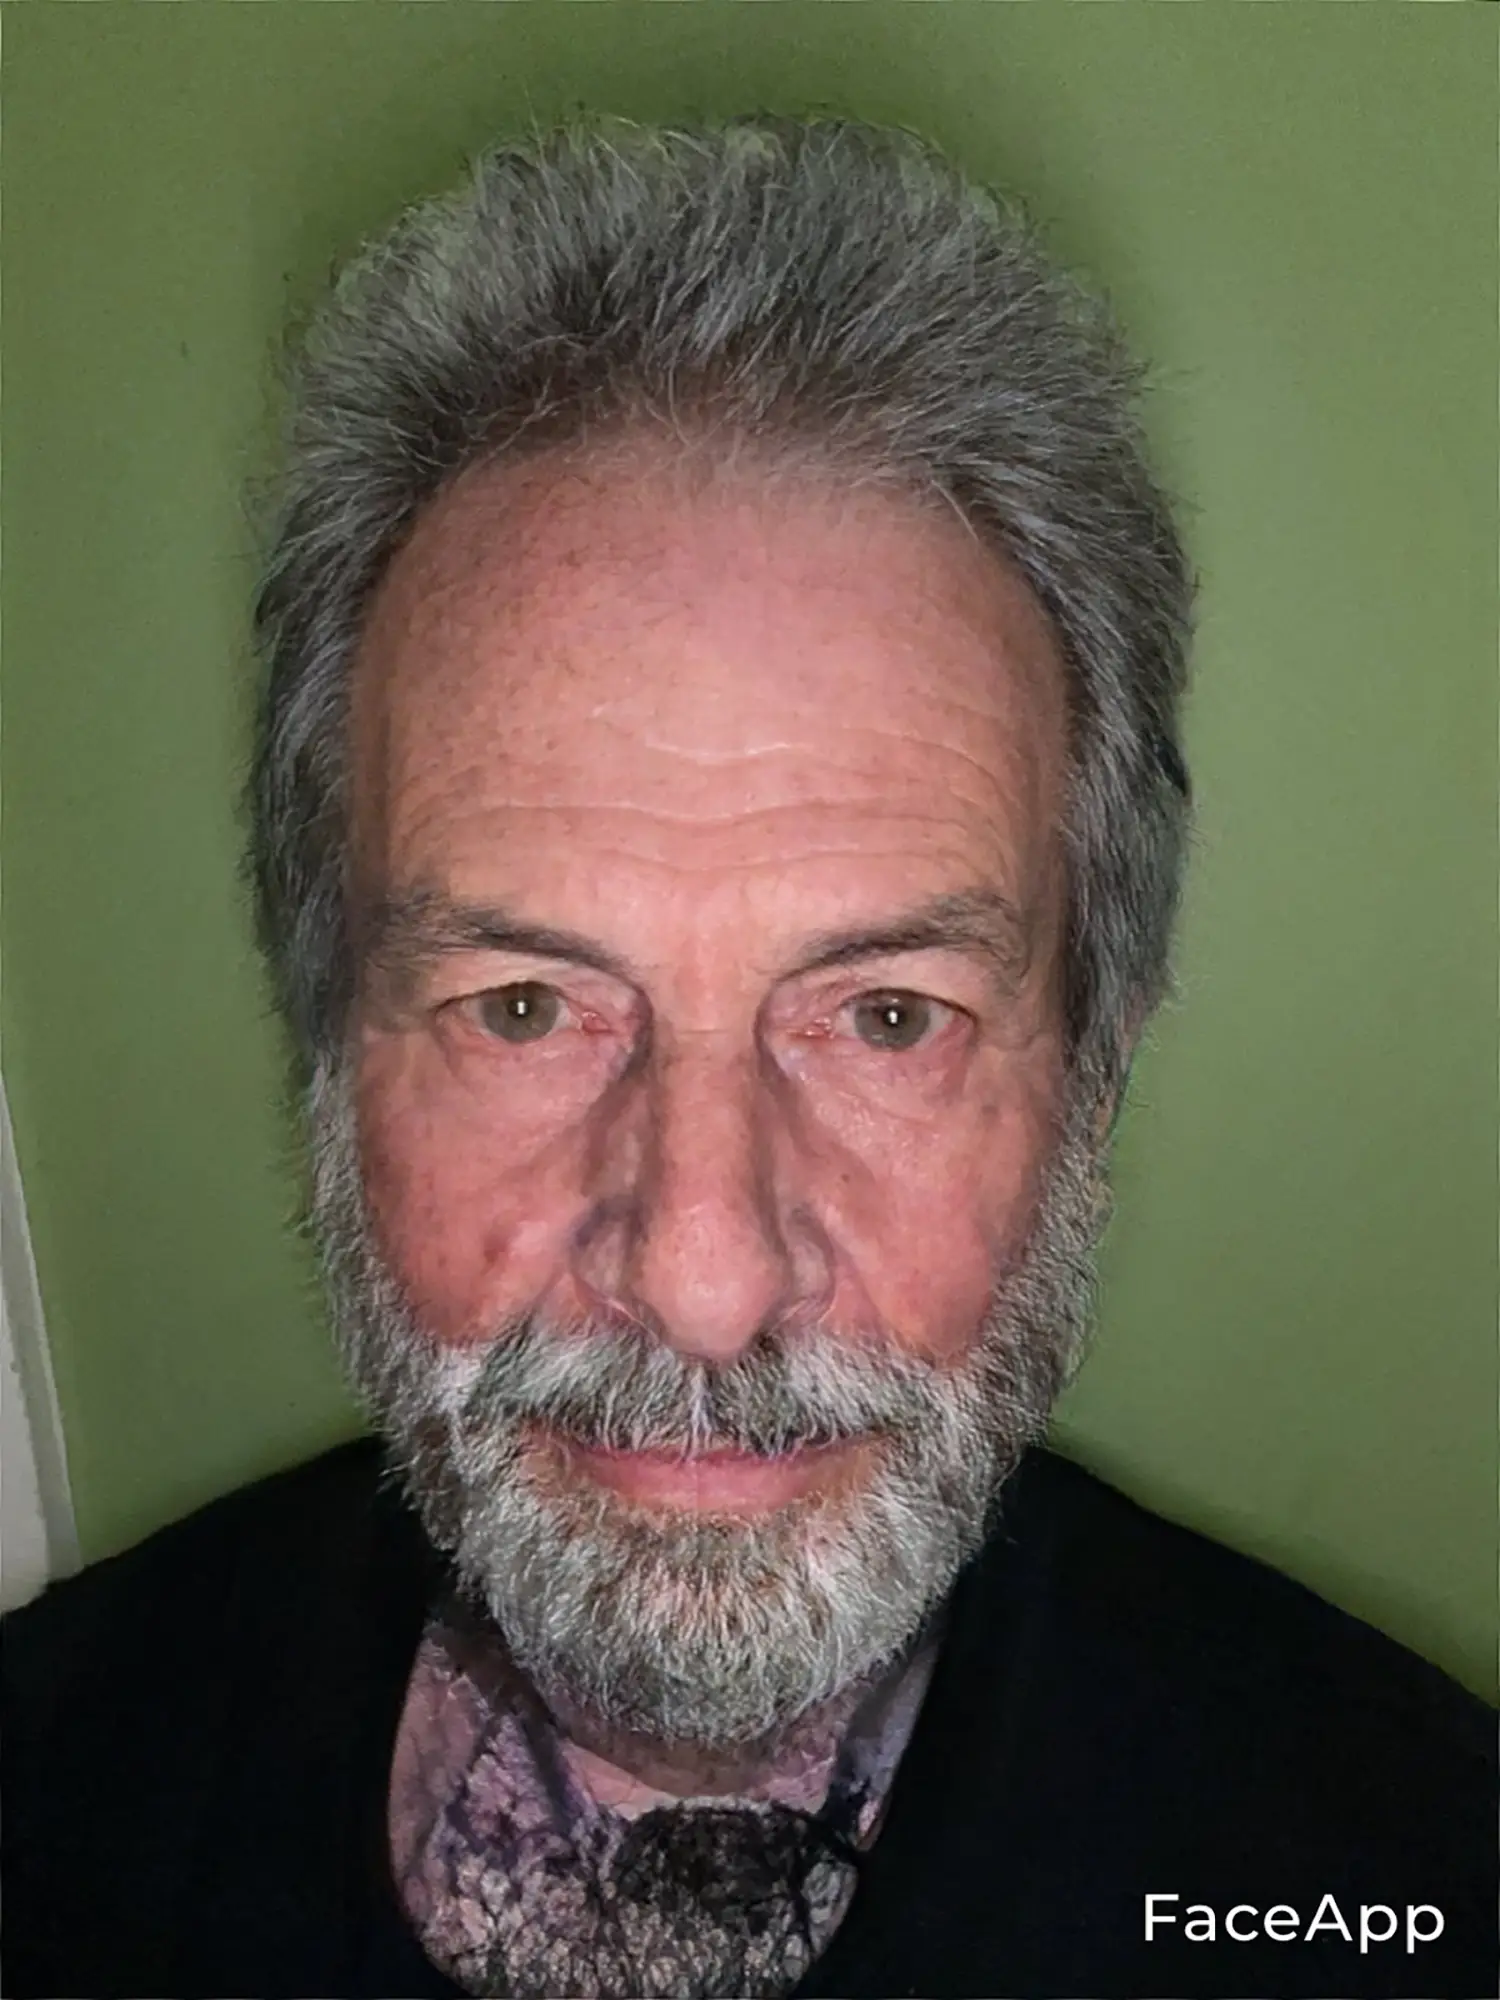 The author’s face transformed by filters to appear young, wearing lipstick, puffy, and old.